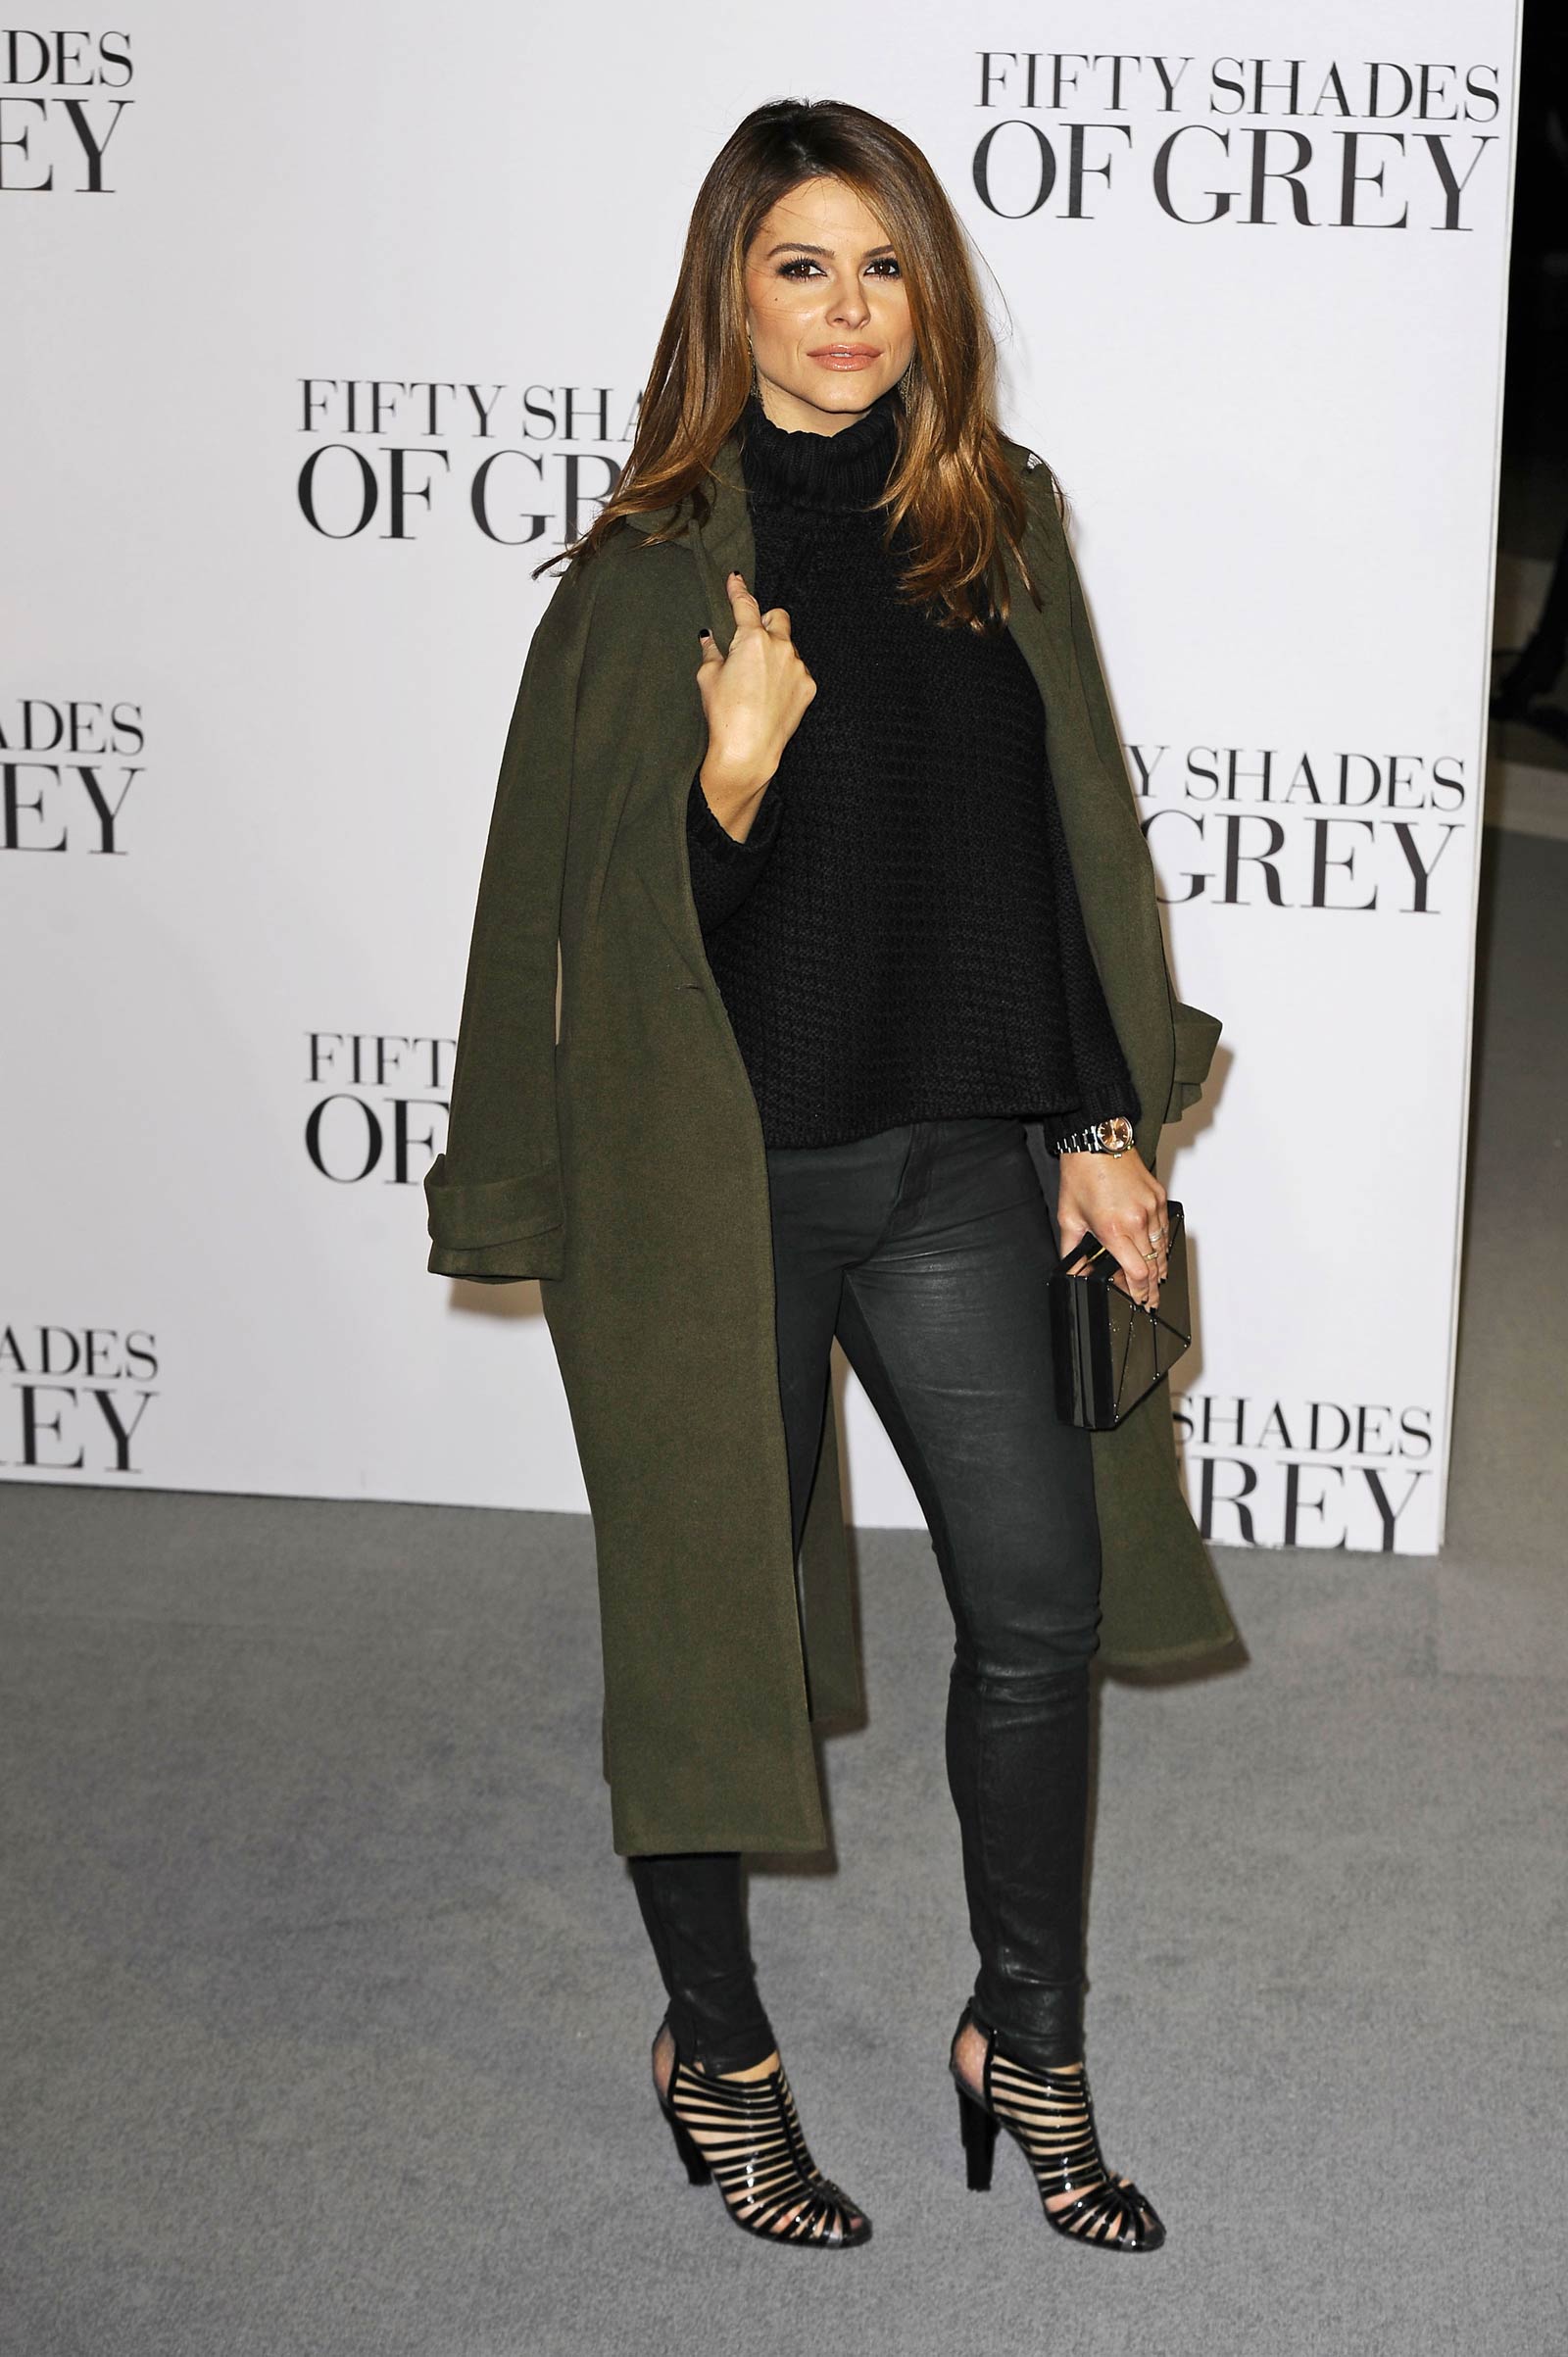 Maria Menounos attends Fifty Shades Of Grey Premiere